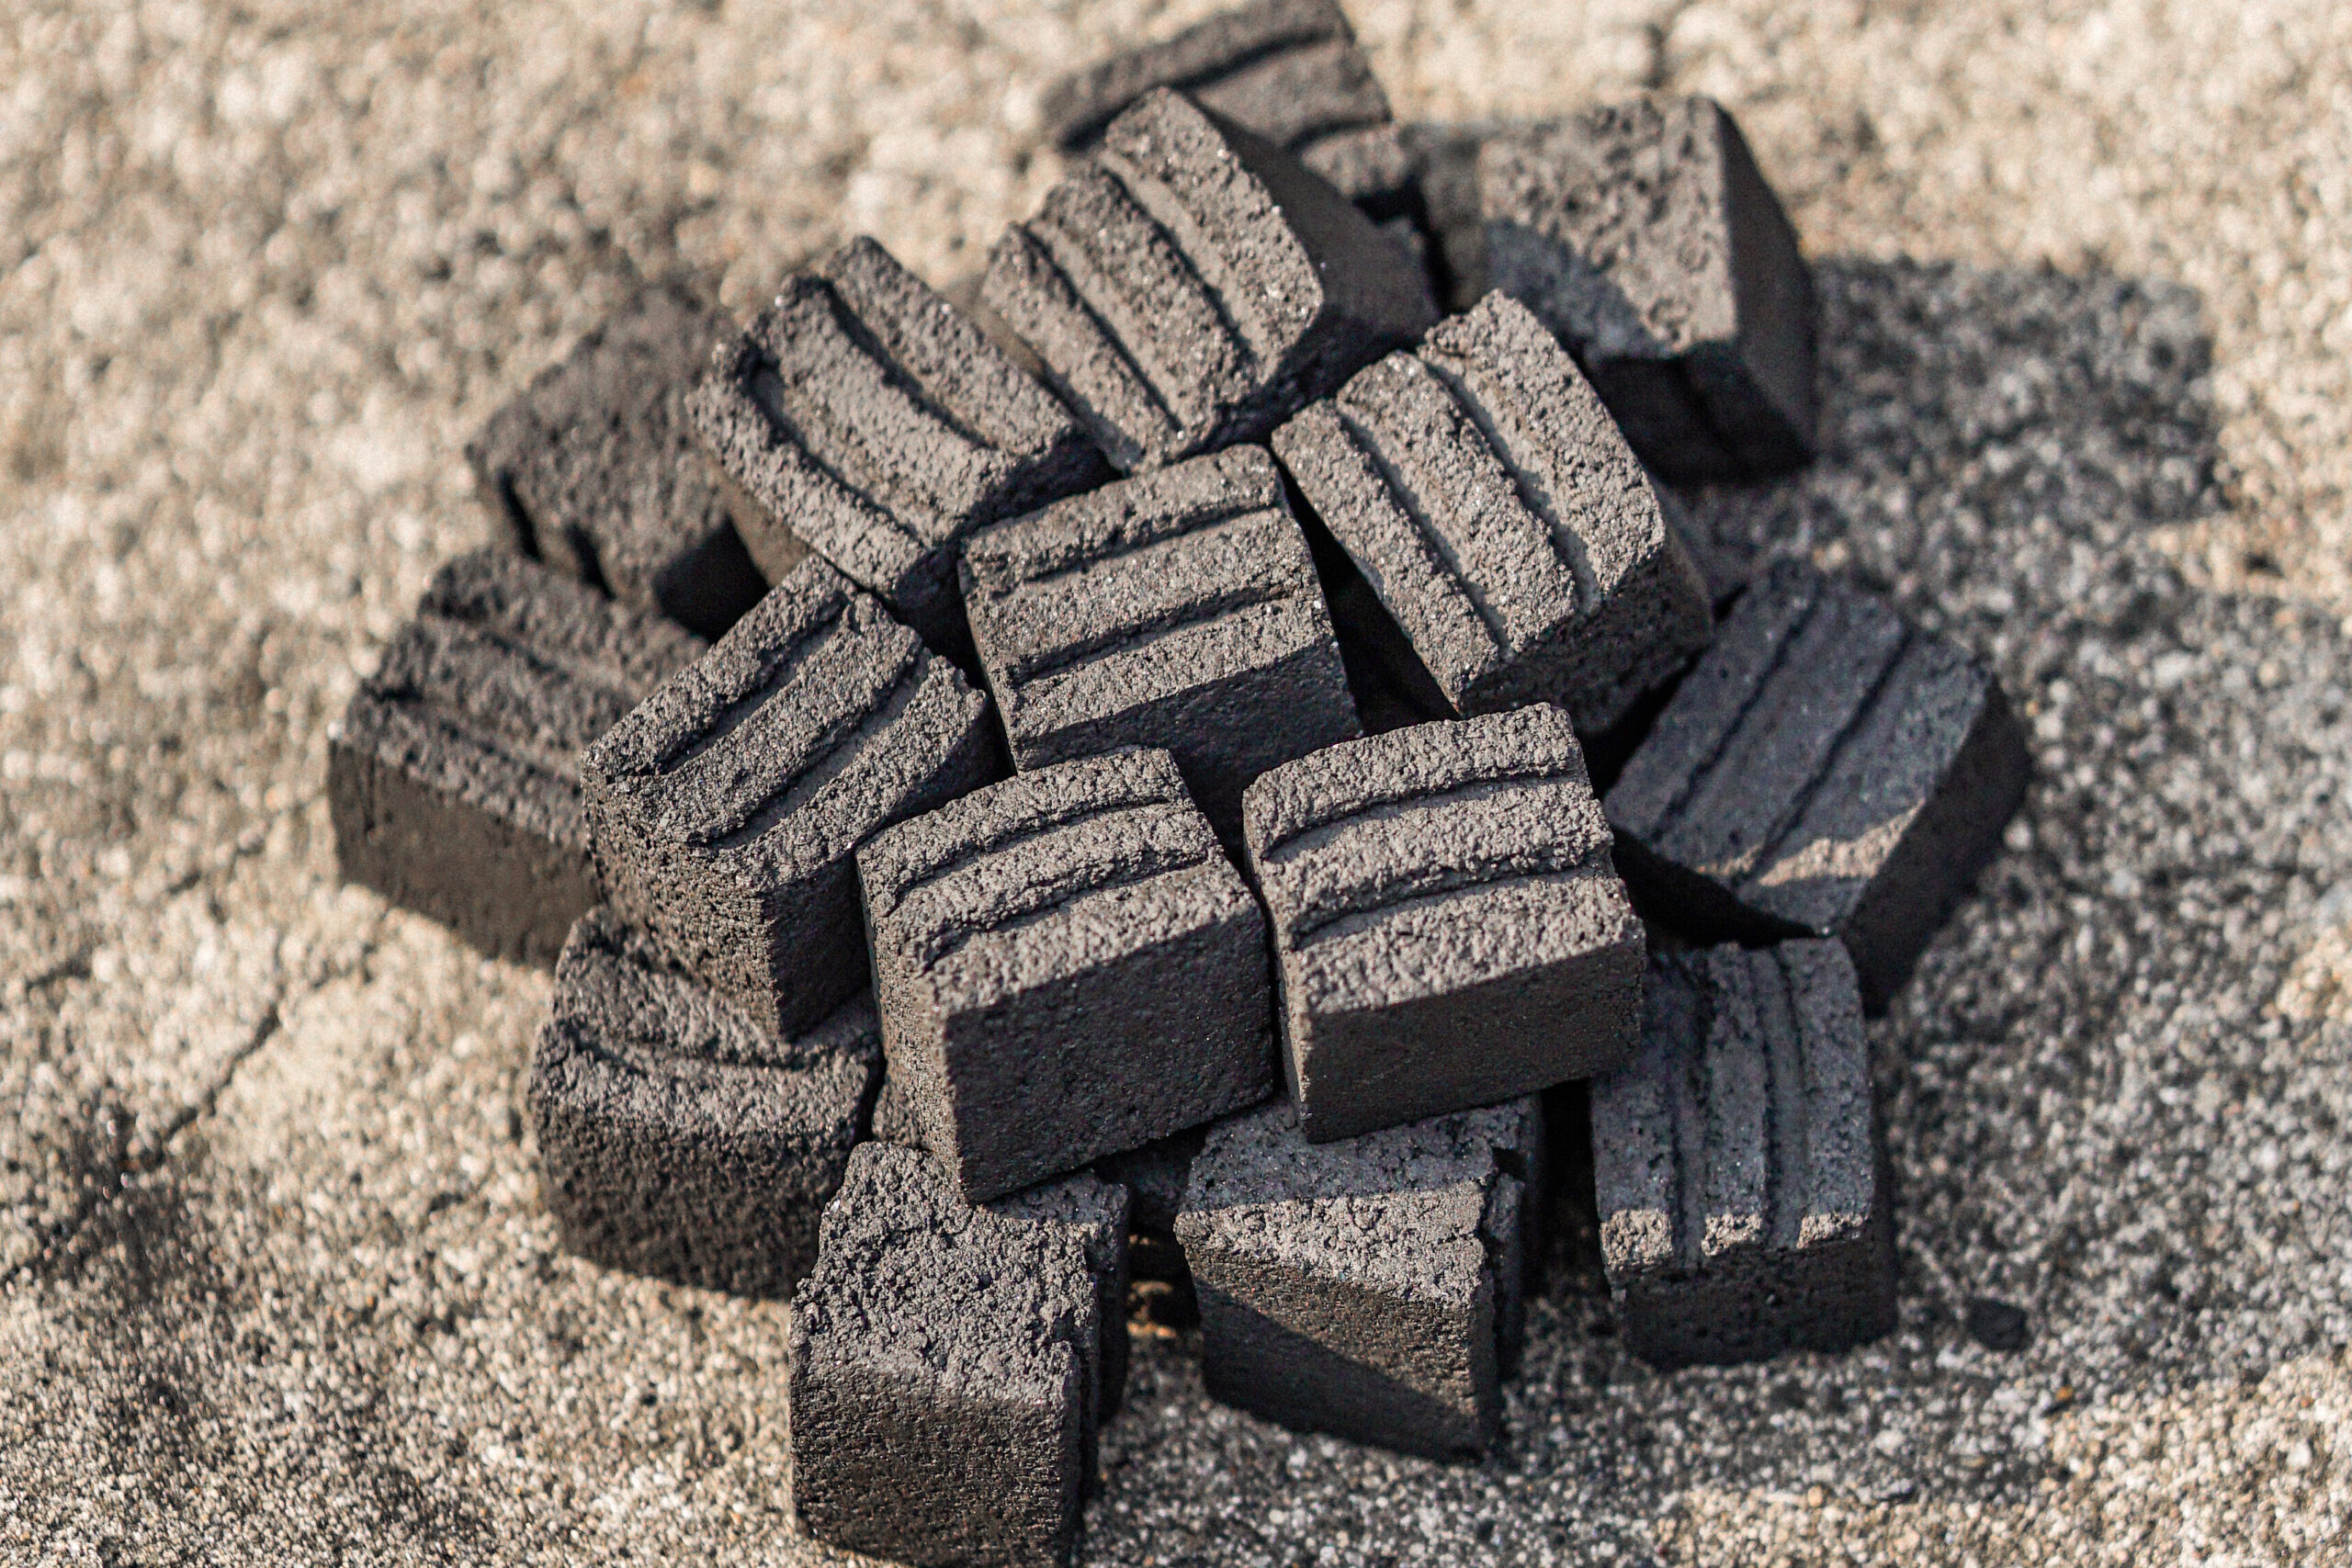 A Pile of Cube Two Lines Shaped Coconut Briquette Charcoals On The Ground